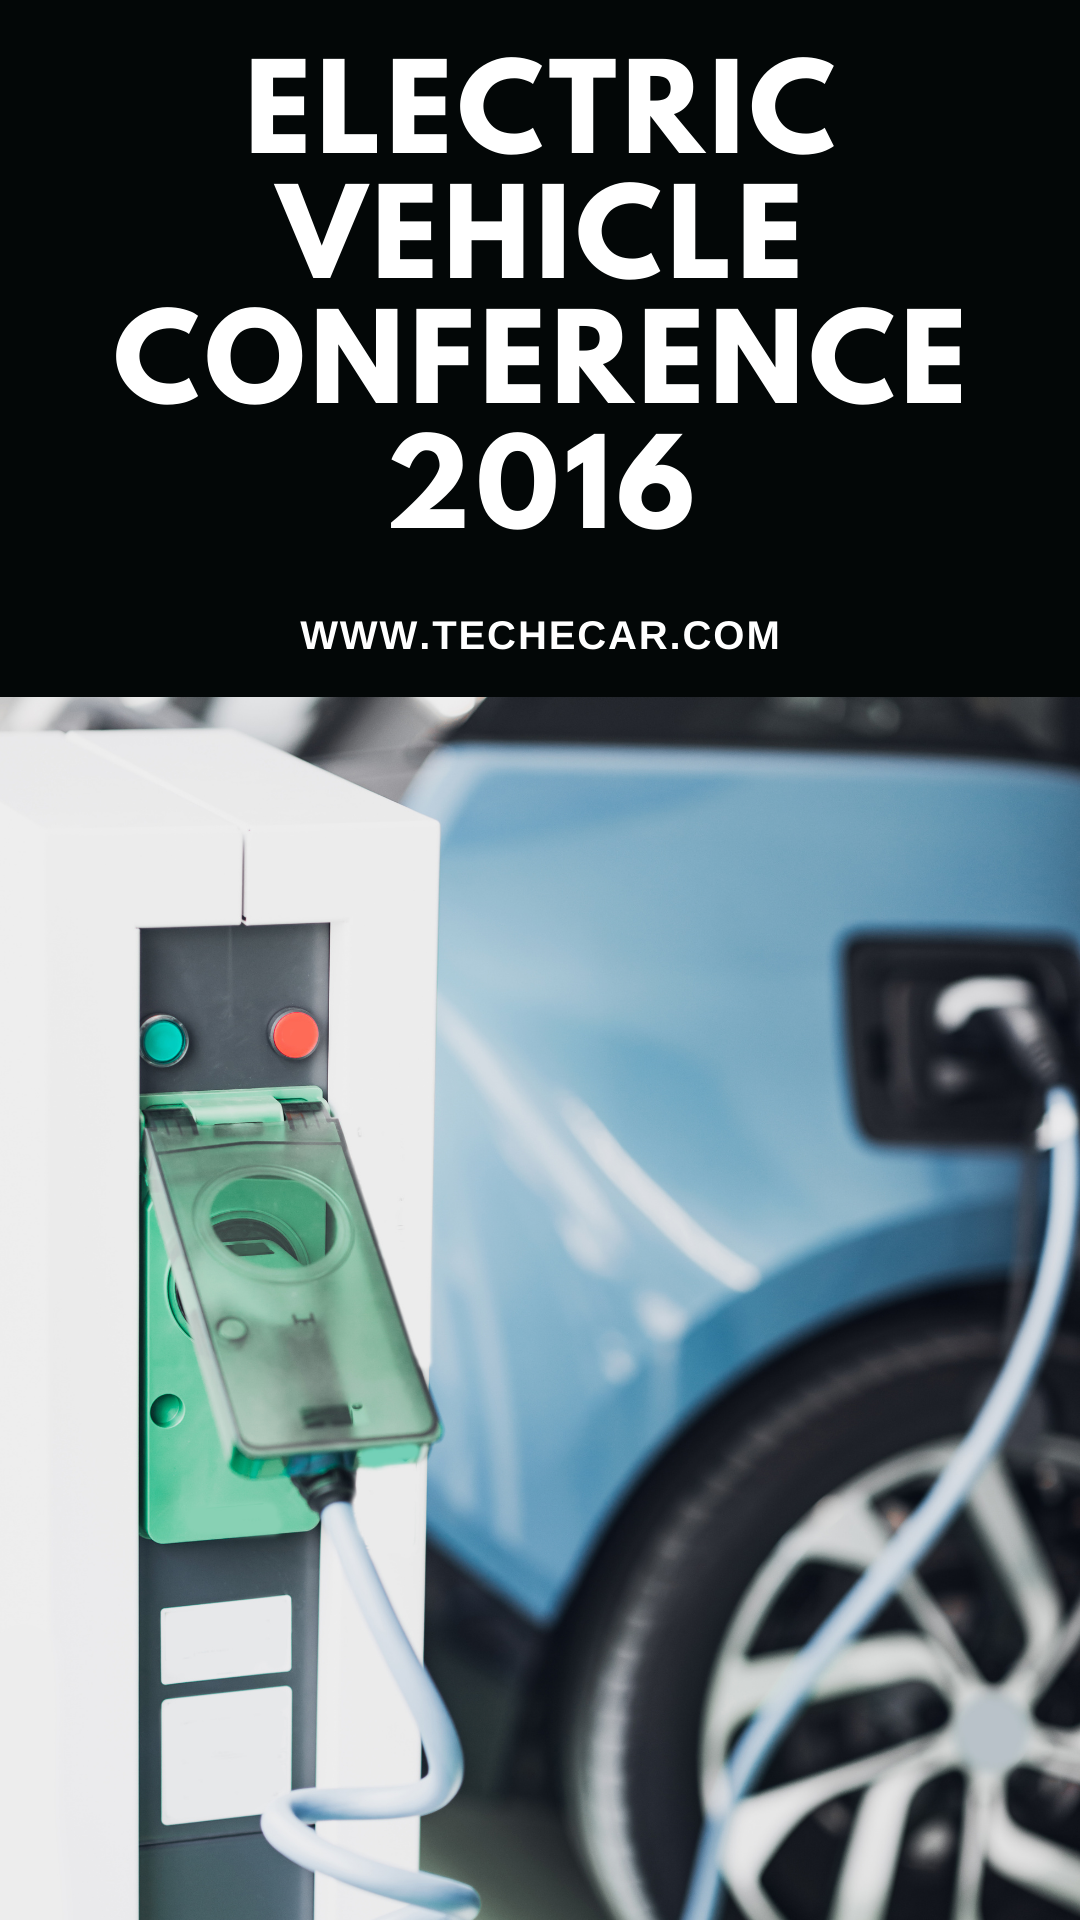 Electric Vehicle Conference 2016